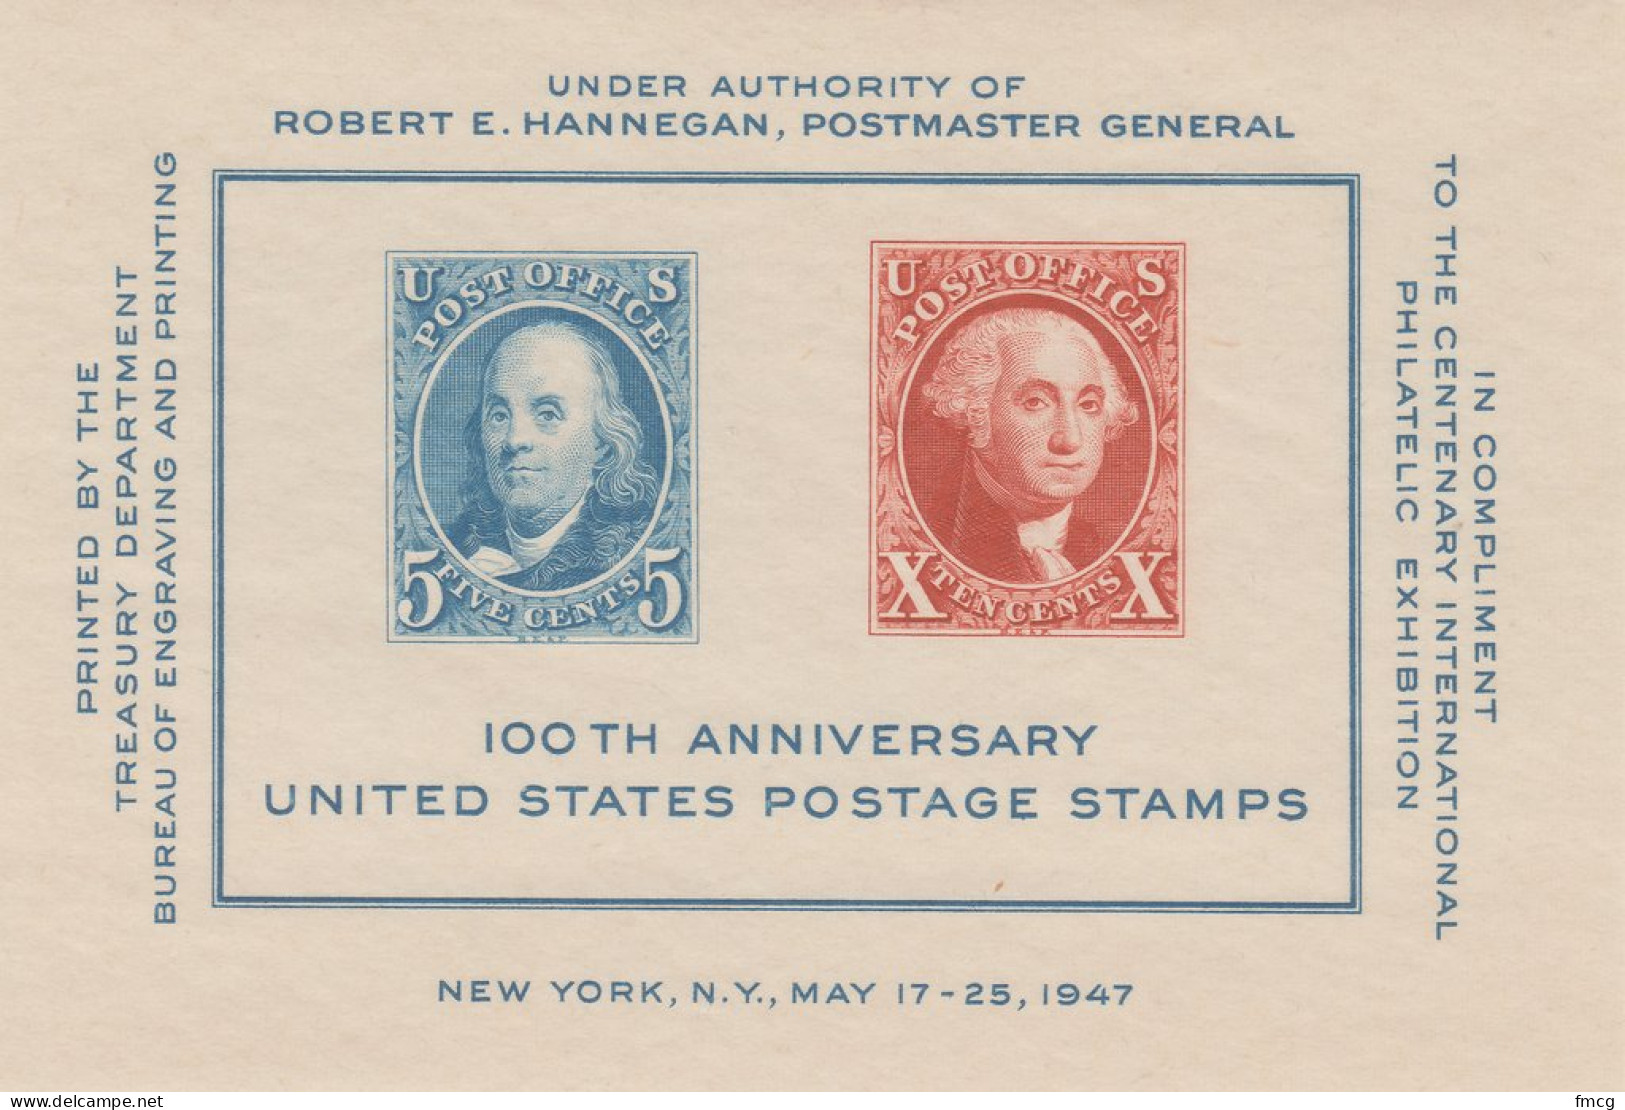 1947 CIPEX Souvenir Sheet Of 2 Stamps, Mint Never Hinged  - Unused Stamps